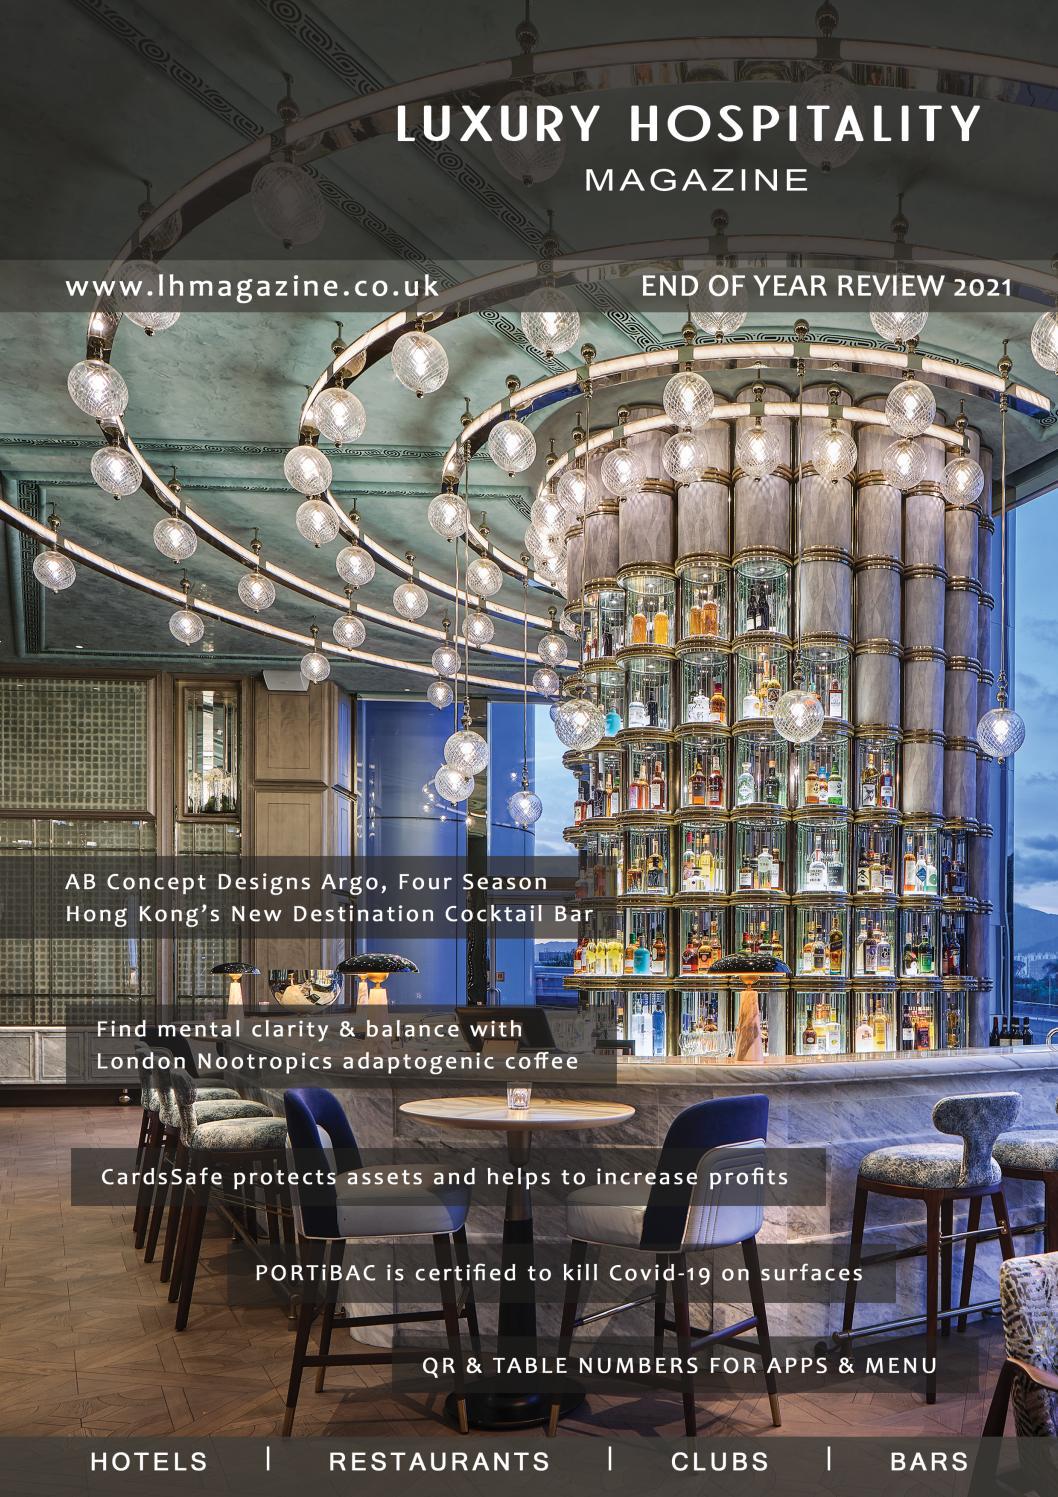 Luxury Hospitality Magazine - End of Year Review Edition 2021